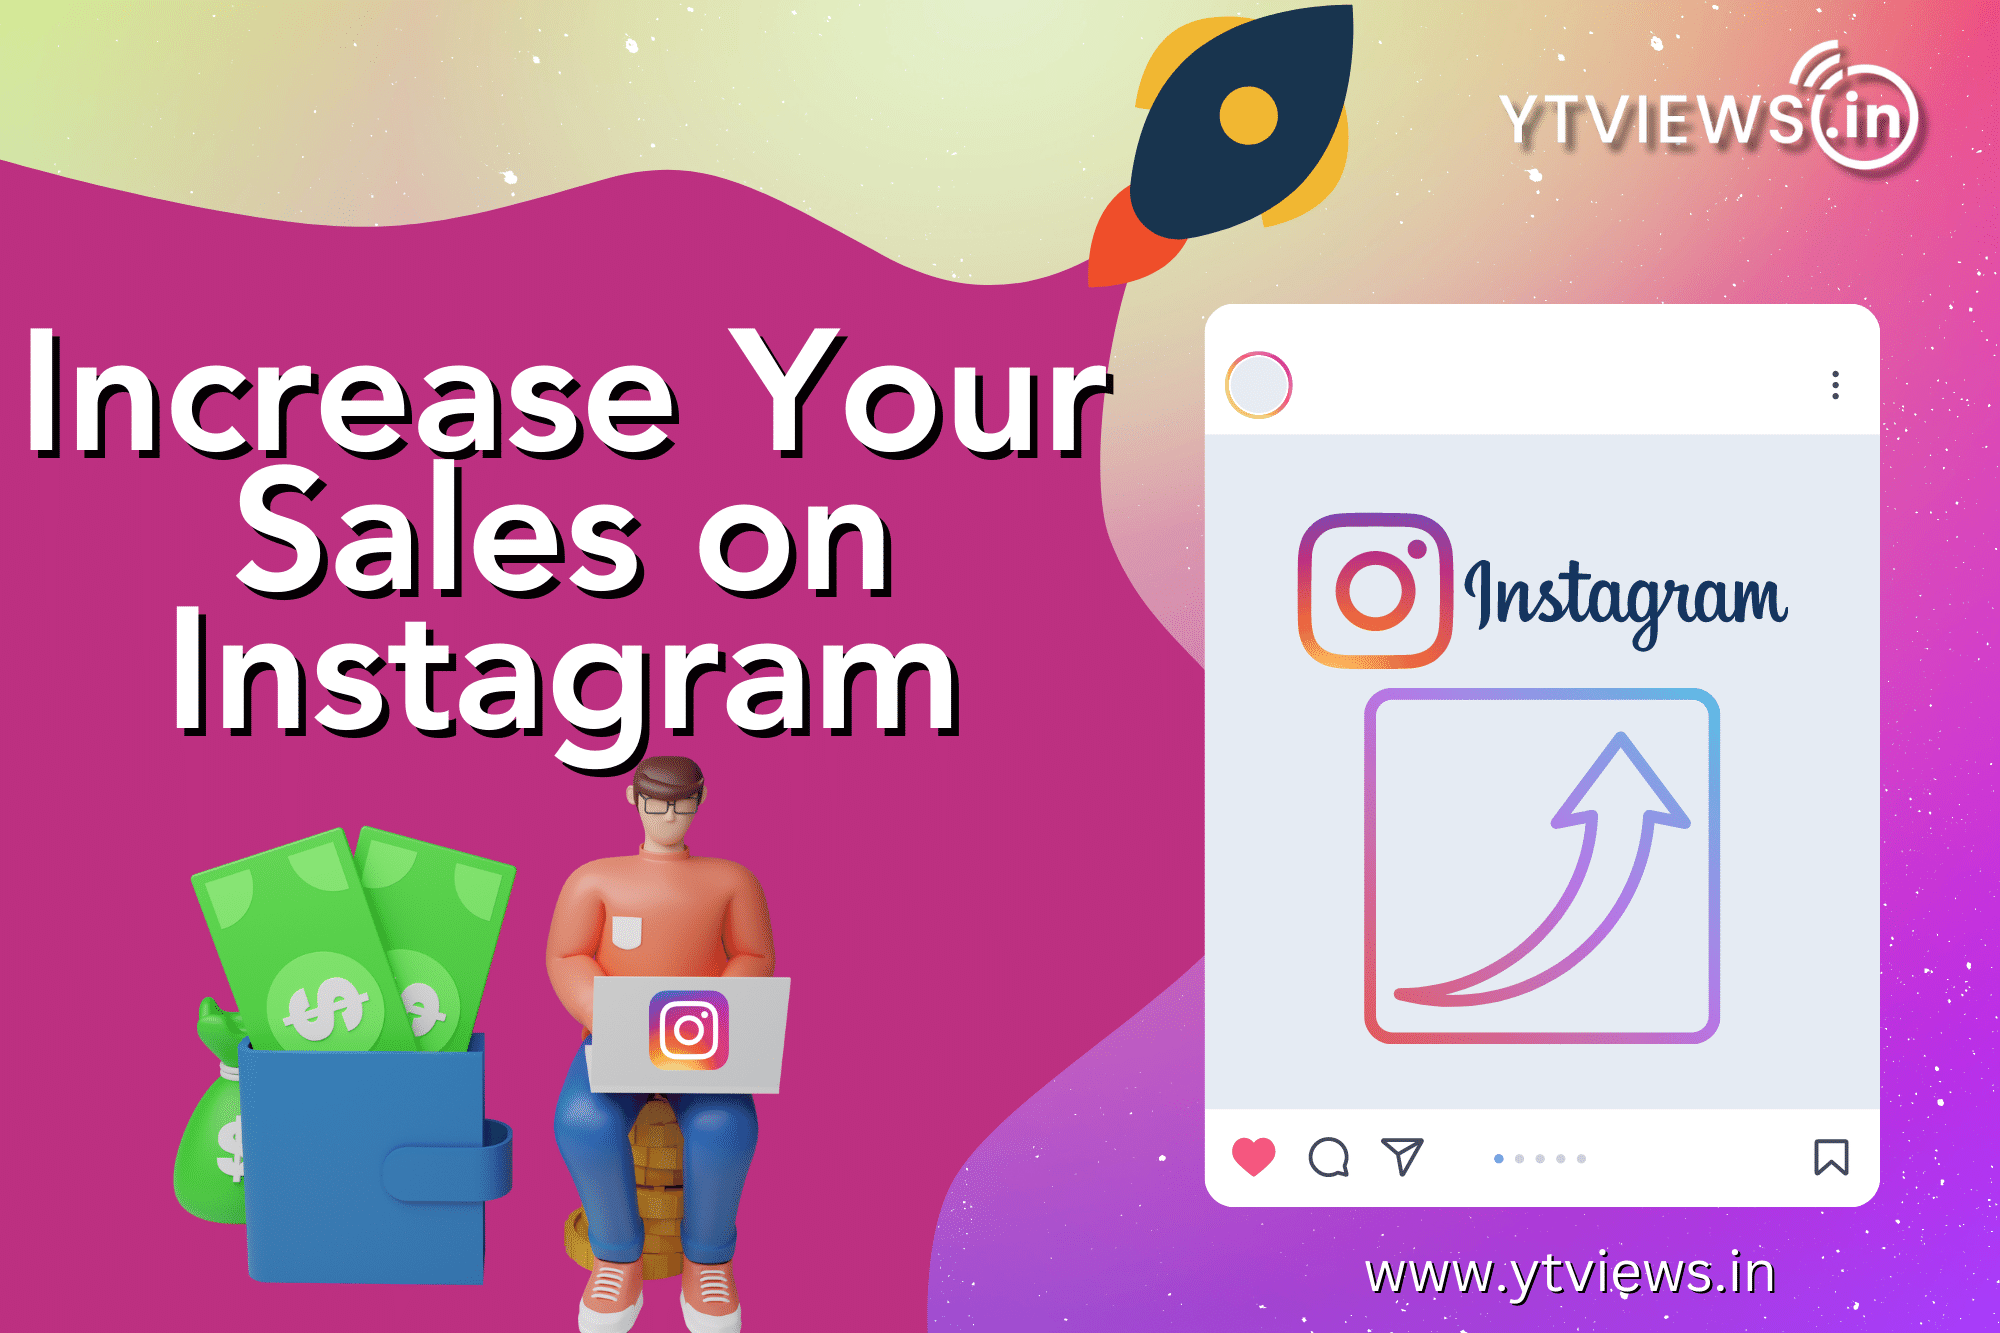 How can you grow your sales on Instagram with the help of Ytviews?